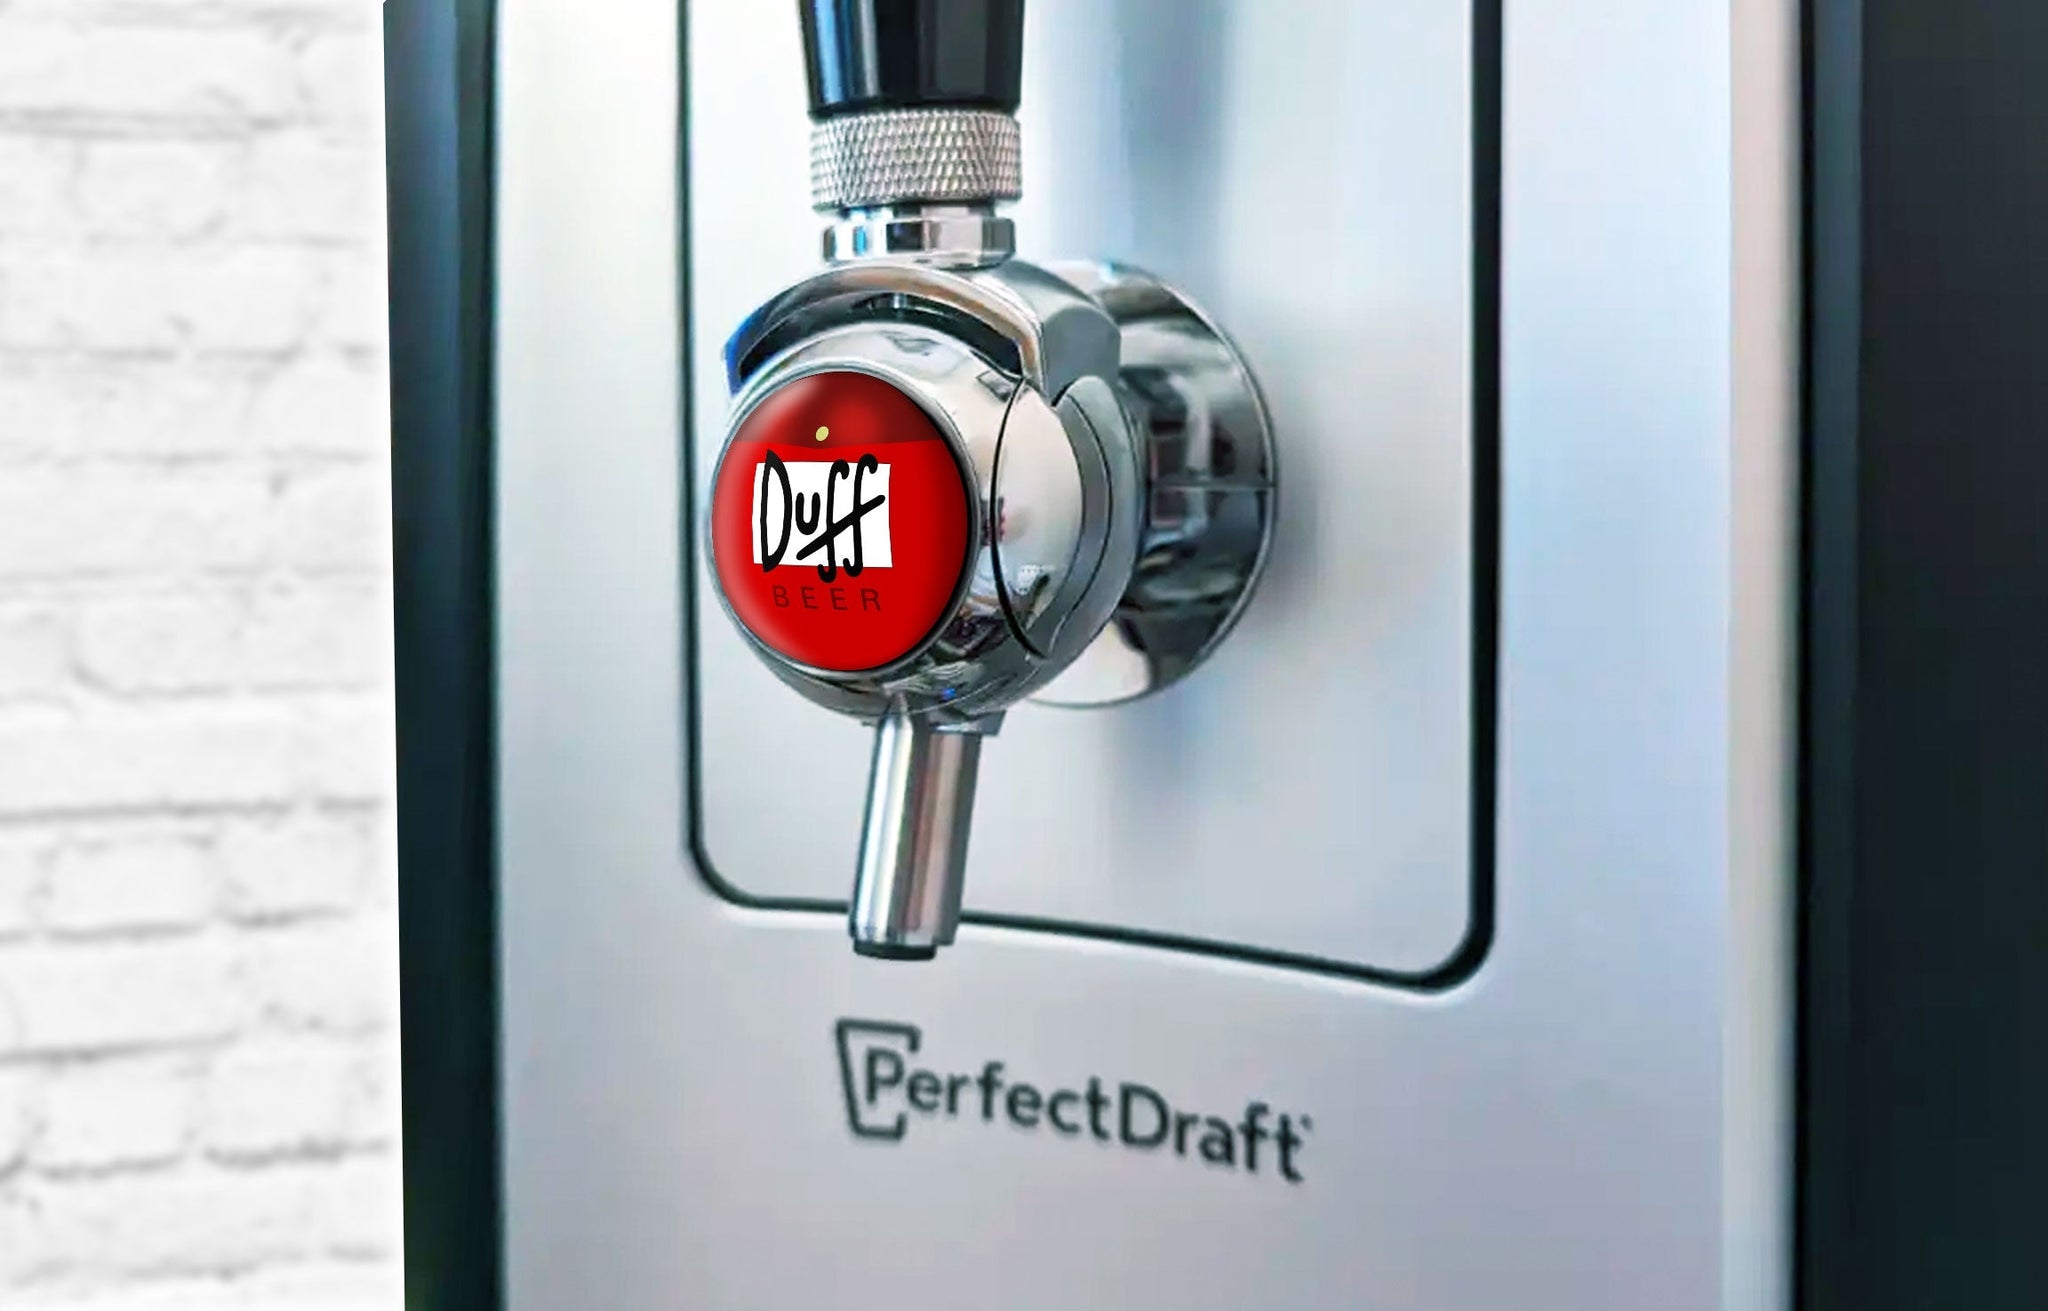 Duff Beer Perfect Draft Pro Medallion